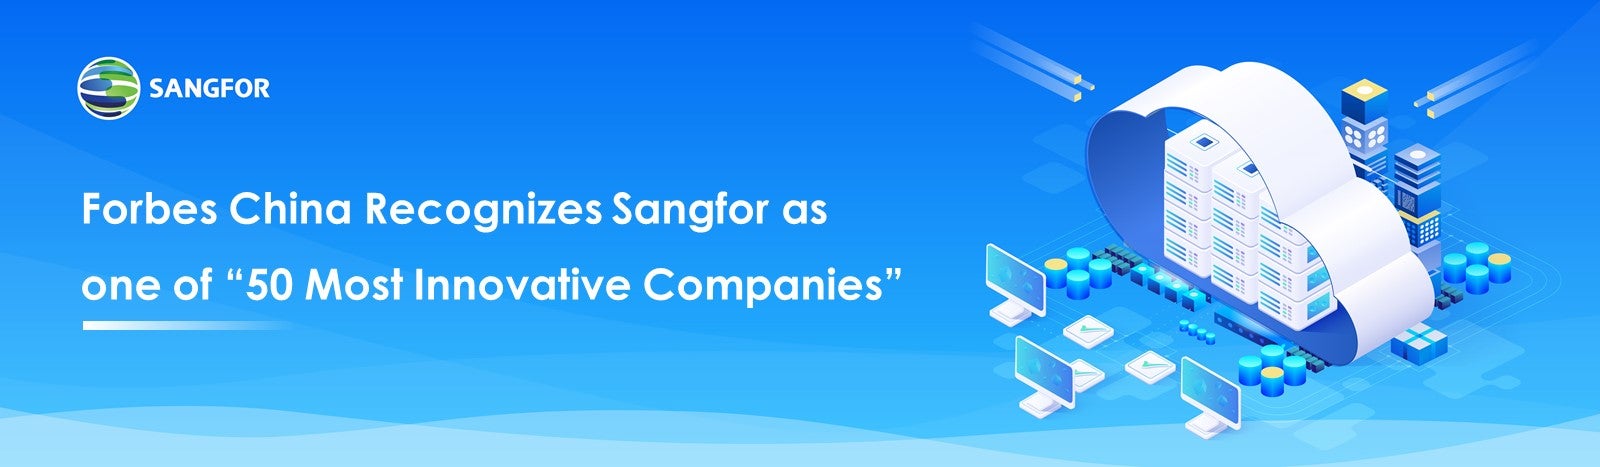 Forbes China Recognizes Sangfor as one of 50 Most Innovative Companies